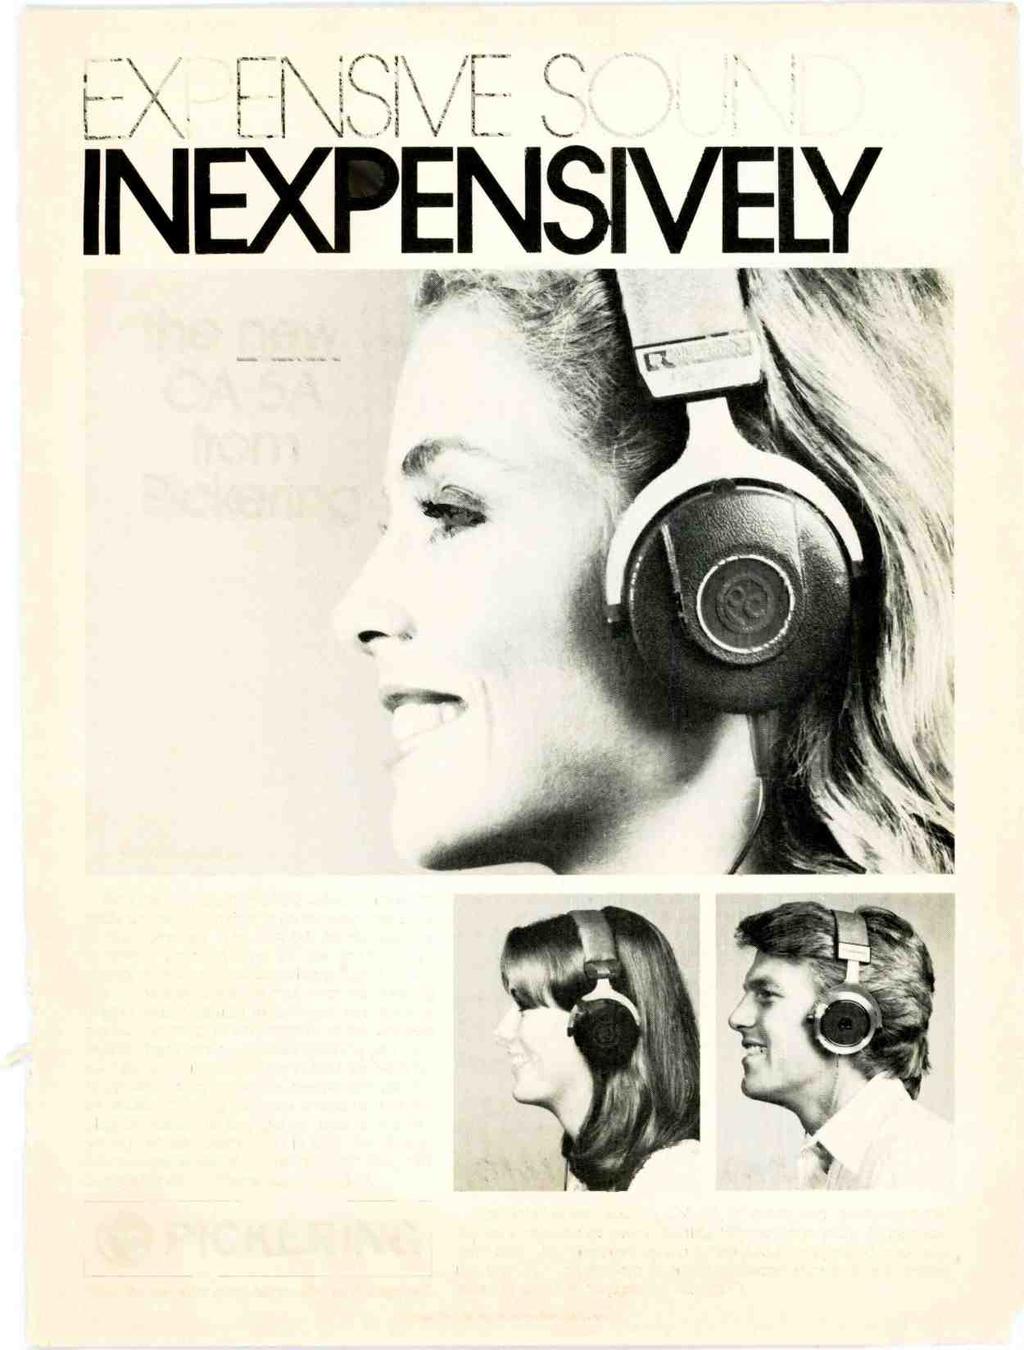 x111\sve SObNDIII INEXPENSIVELY the new OA -5A from Pickering re`. 1979 PICKERING & CO INC With the introduction of the OA -5A Pickering adds a new dimension to an already great line of headphones.